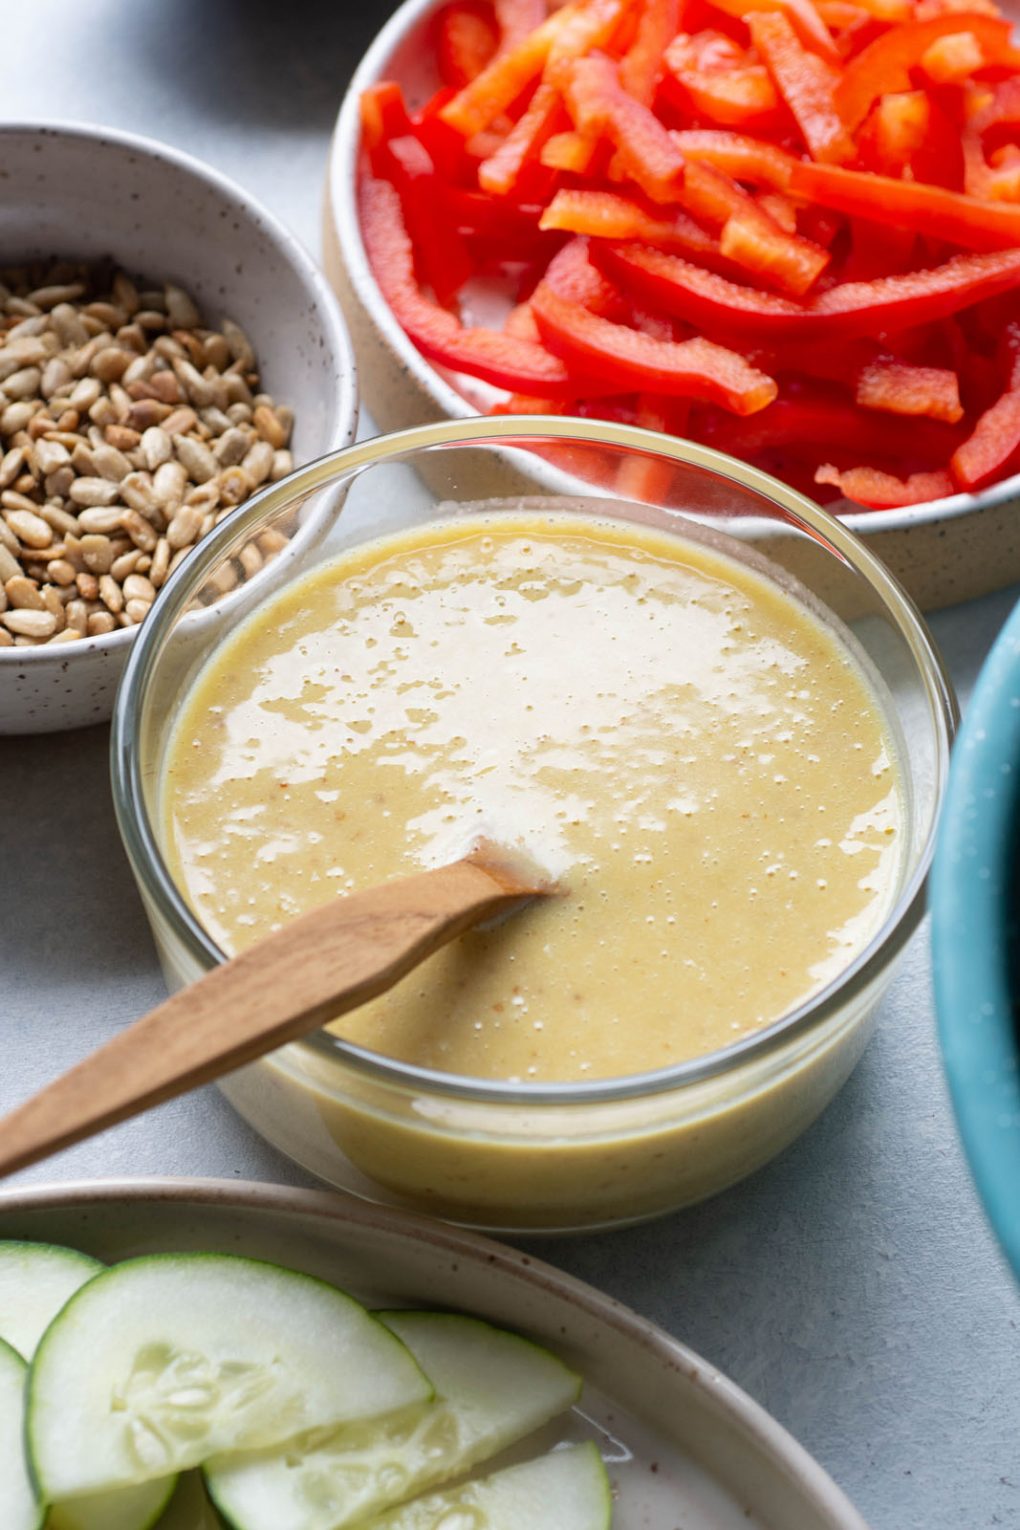 Side angle shot of a small glass pyrex of honey mustard dressing with a wooden spoon. On a light background surrounded by several ingredient bowls.